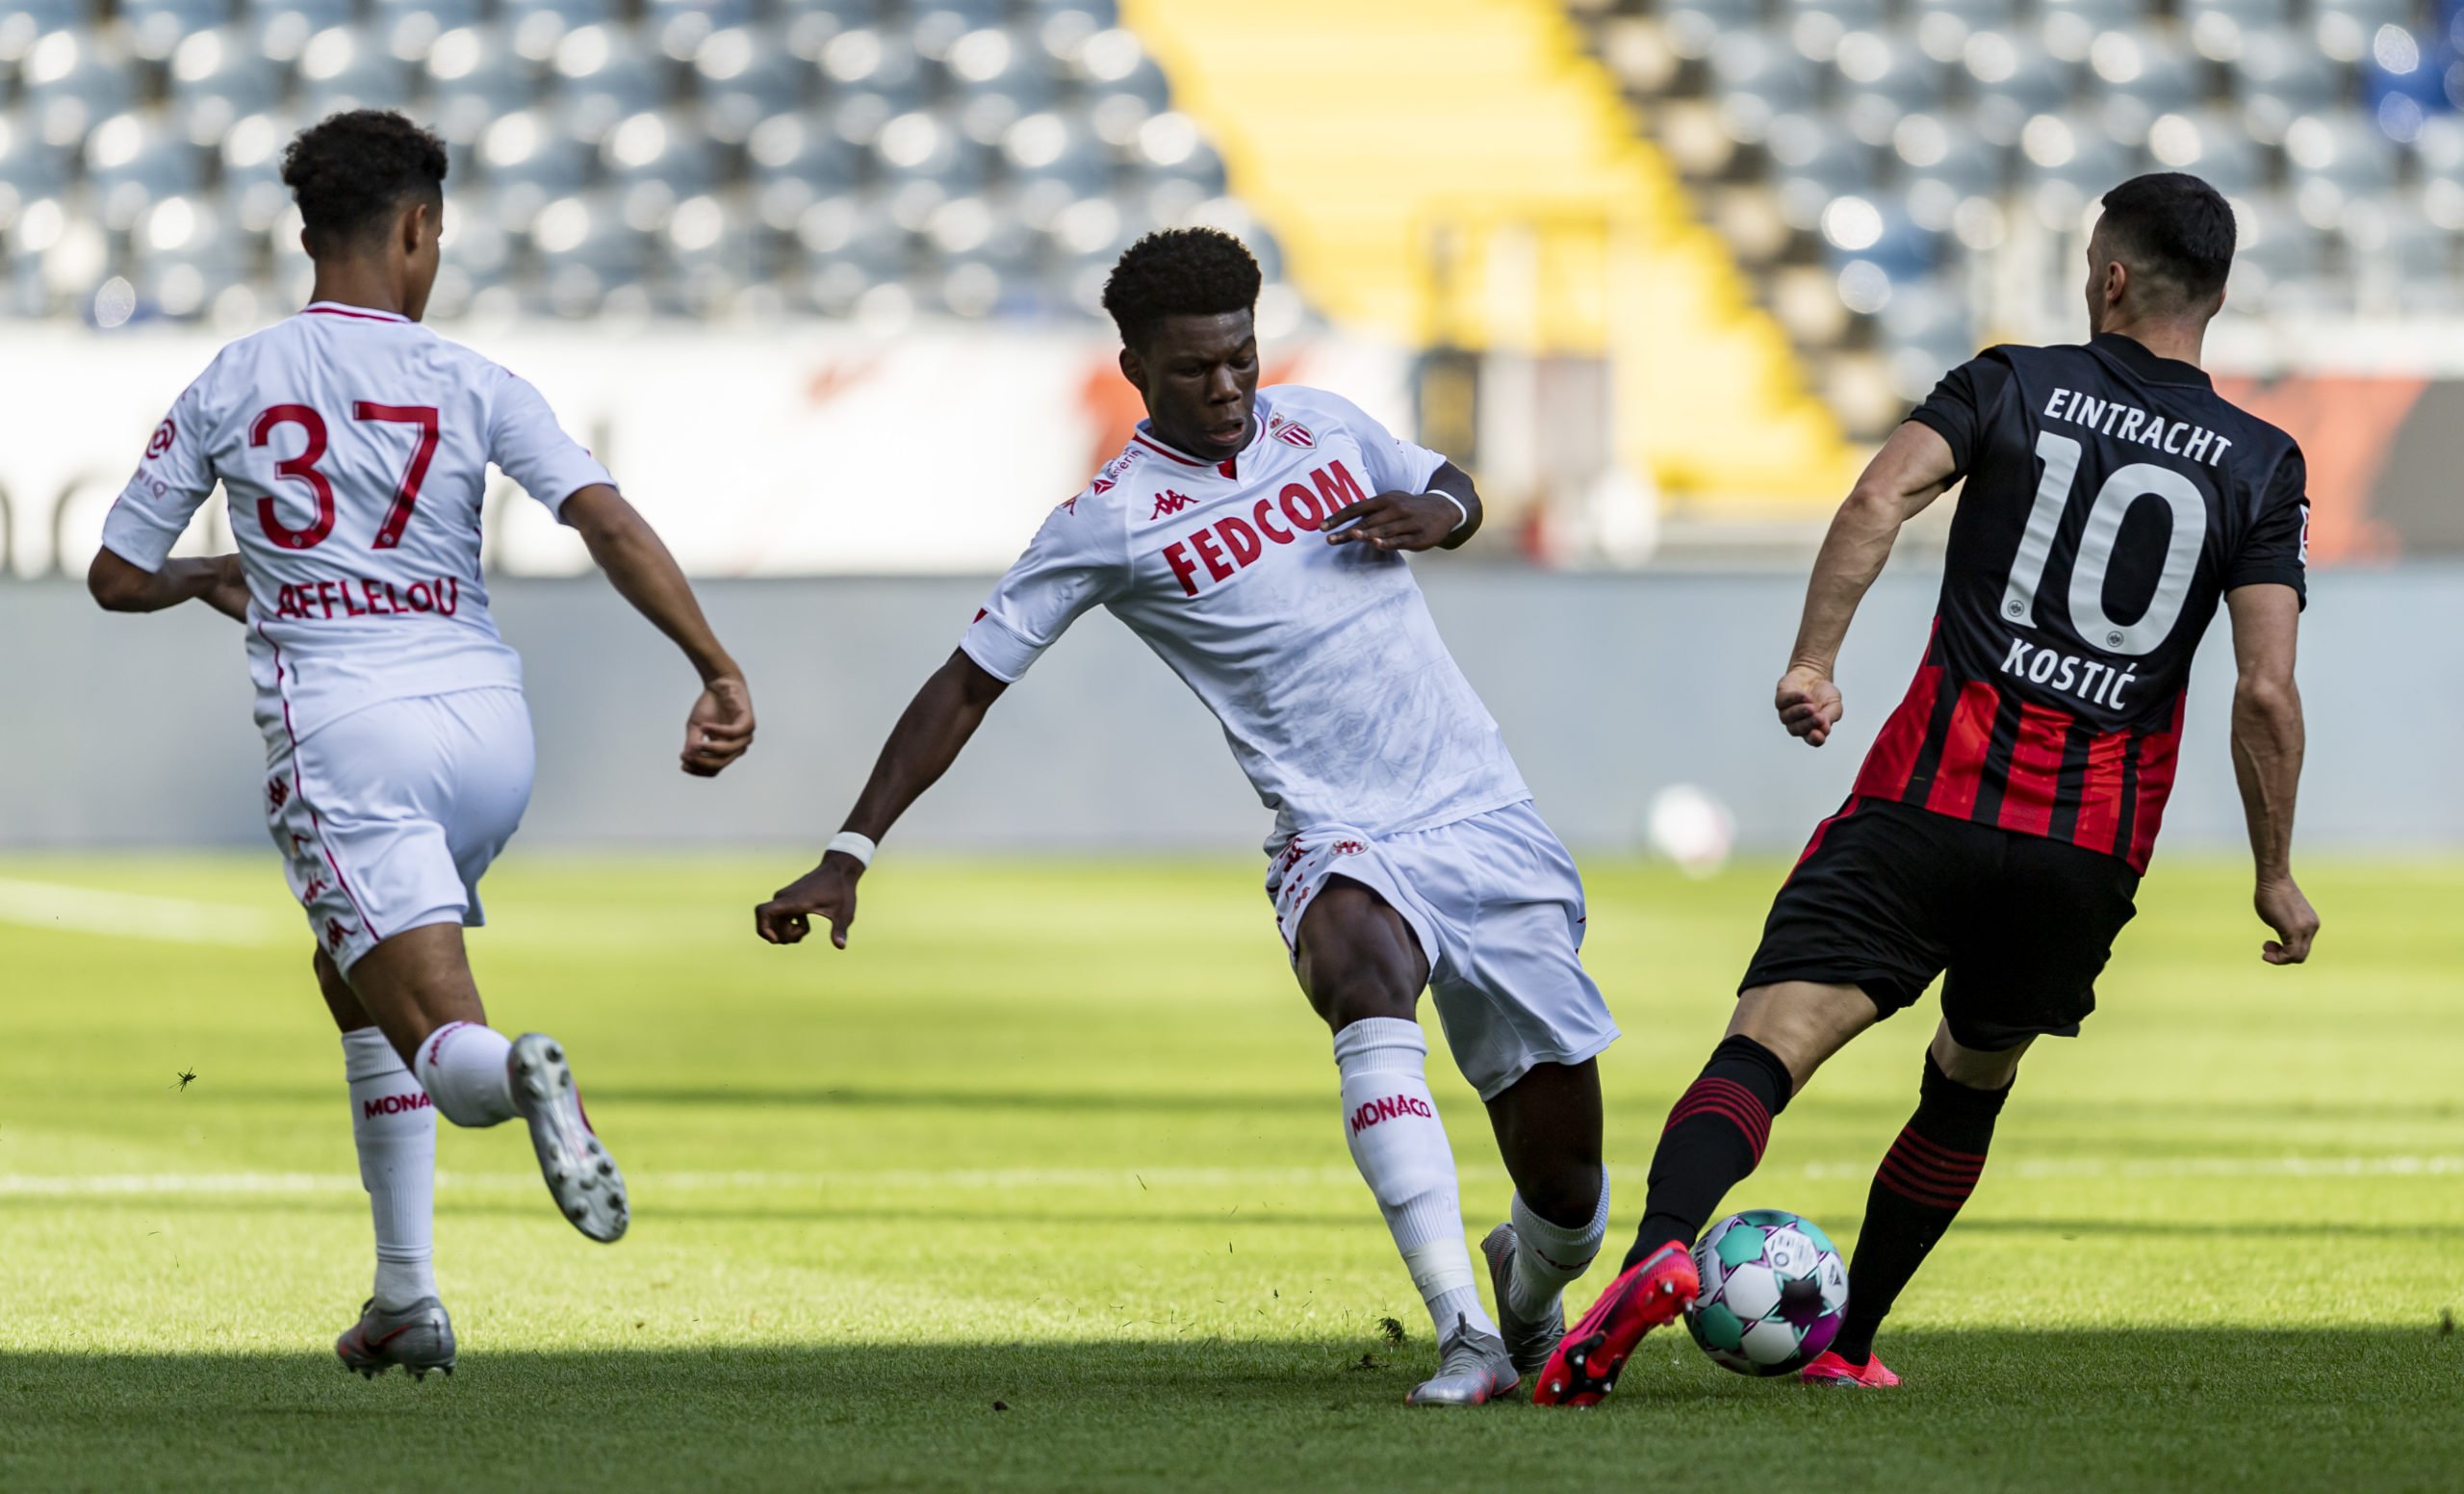 FRANKFURT AM MAIN, GERMANY - AUGUST 01: Aurelien Tchouameni of Monaco in action against Filip Kostic of Frankfurt during the friendly match between Eintracht Frankfurt and AS Monaco at Deutsche Bank Park on August 01, 2020 in Frankfurt am Main, Germany. (Photo by Alexander Scheuber/Getty Images)The 4th Official uses images provided by the following image agency: Getty Images (https://www.gettyimages.de/) Imago Images (https://www.imago-images.de/)